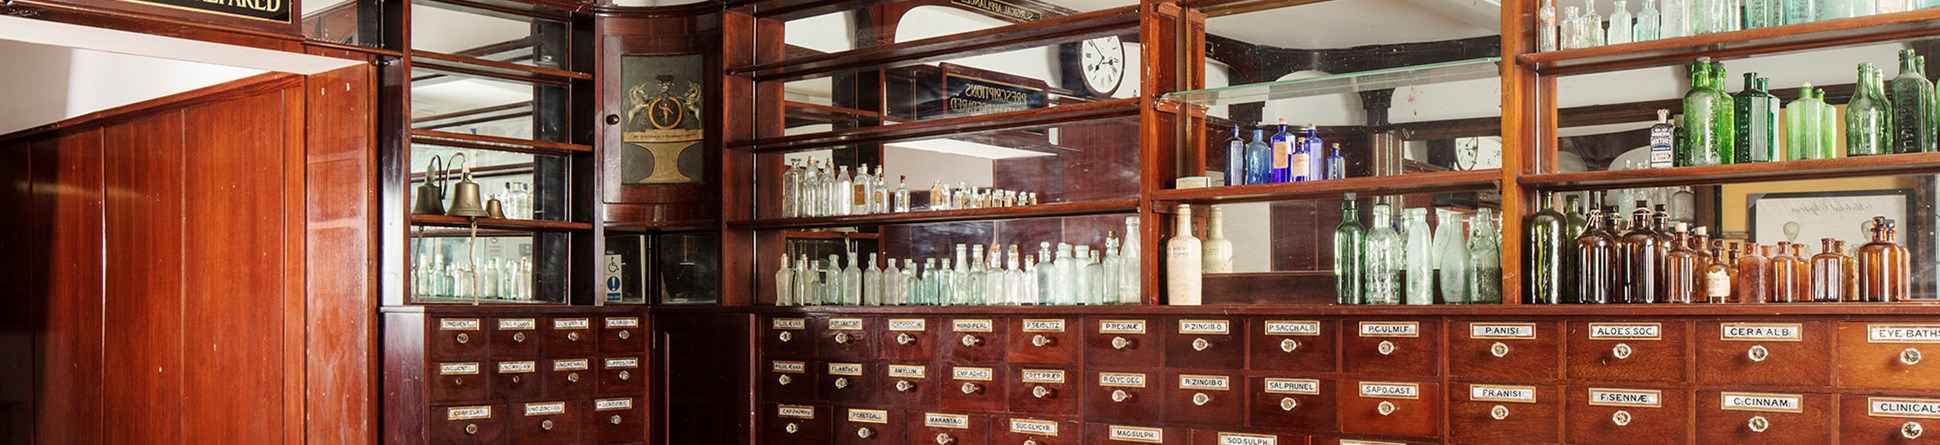 Interior of chemist shop with original drawers and shelves